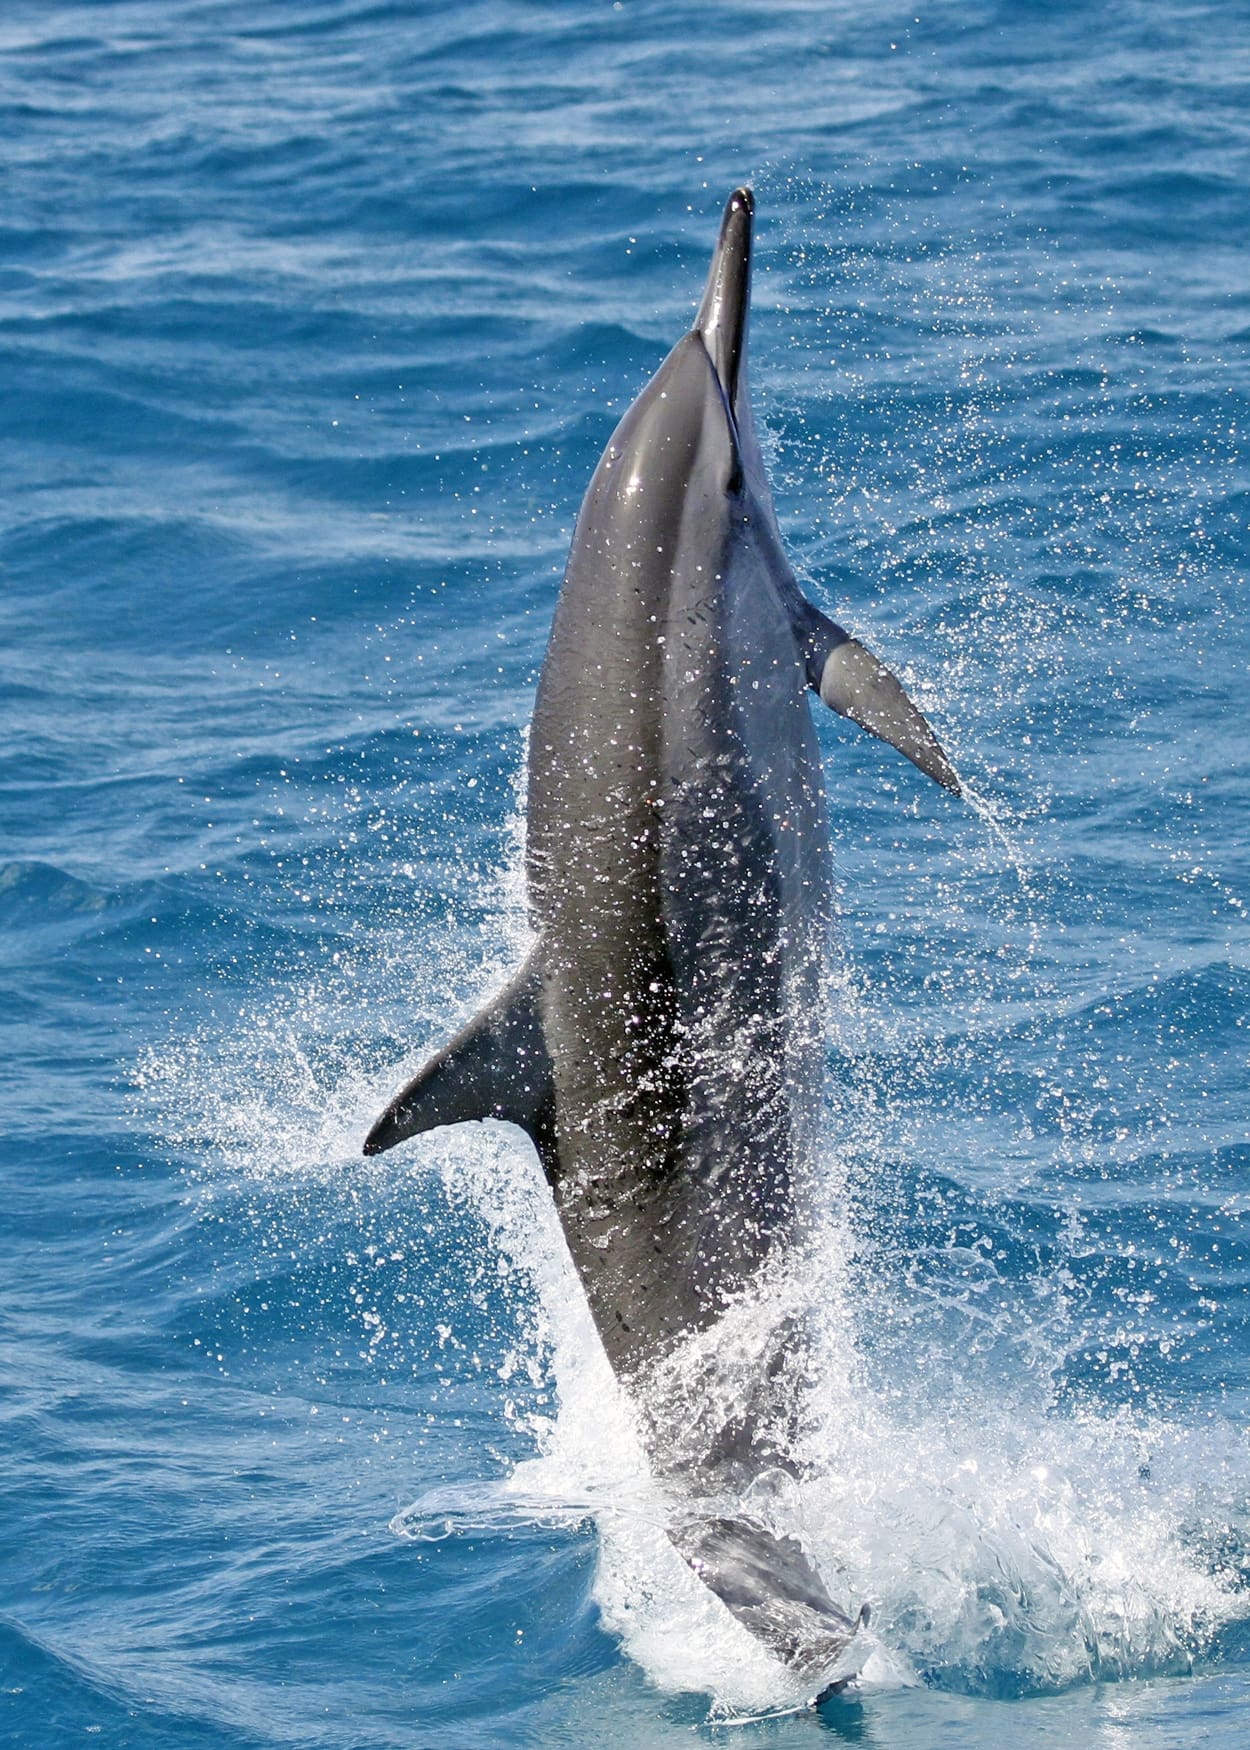 A spinner dolphins (Stenella longirostris) spin by accelerating through the water with rapid pumps of the tail, then muscles a tight twist as it breaks the surface. Underwater, a spinner can generate one to two rotations per second, but out in the open air it can perform up to seven. The display usually ends with a resounding bellyflop.